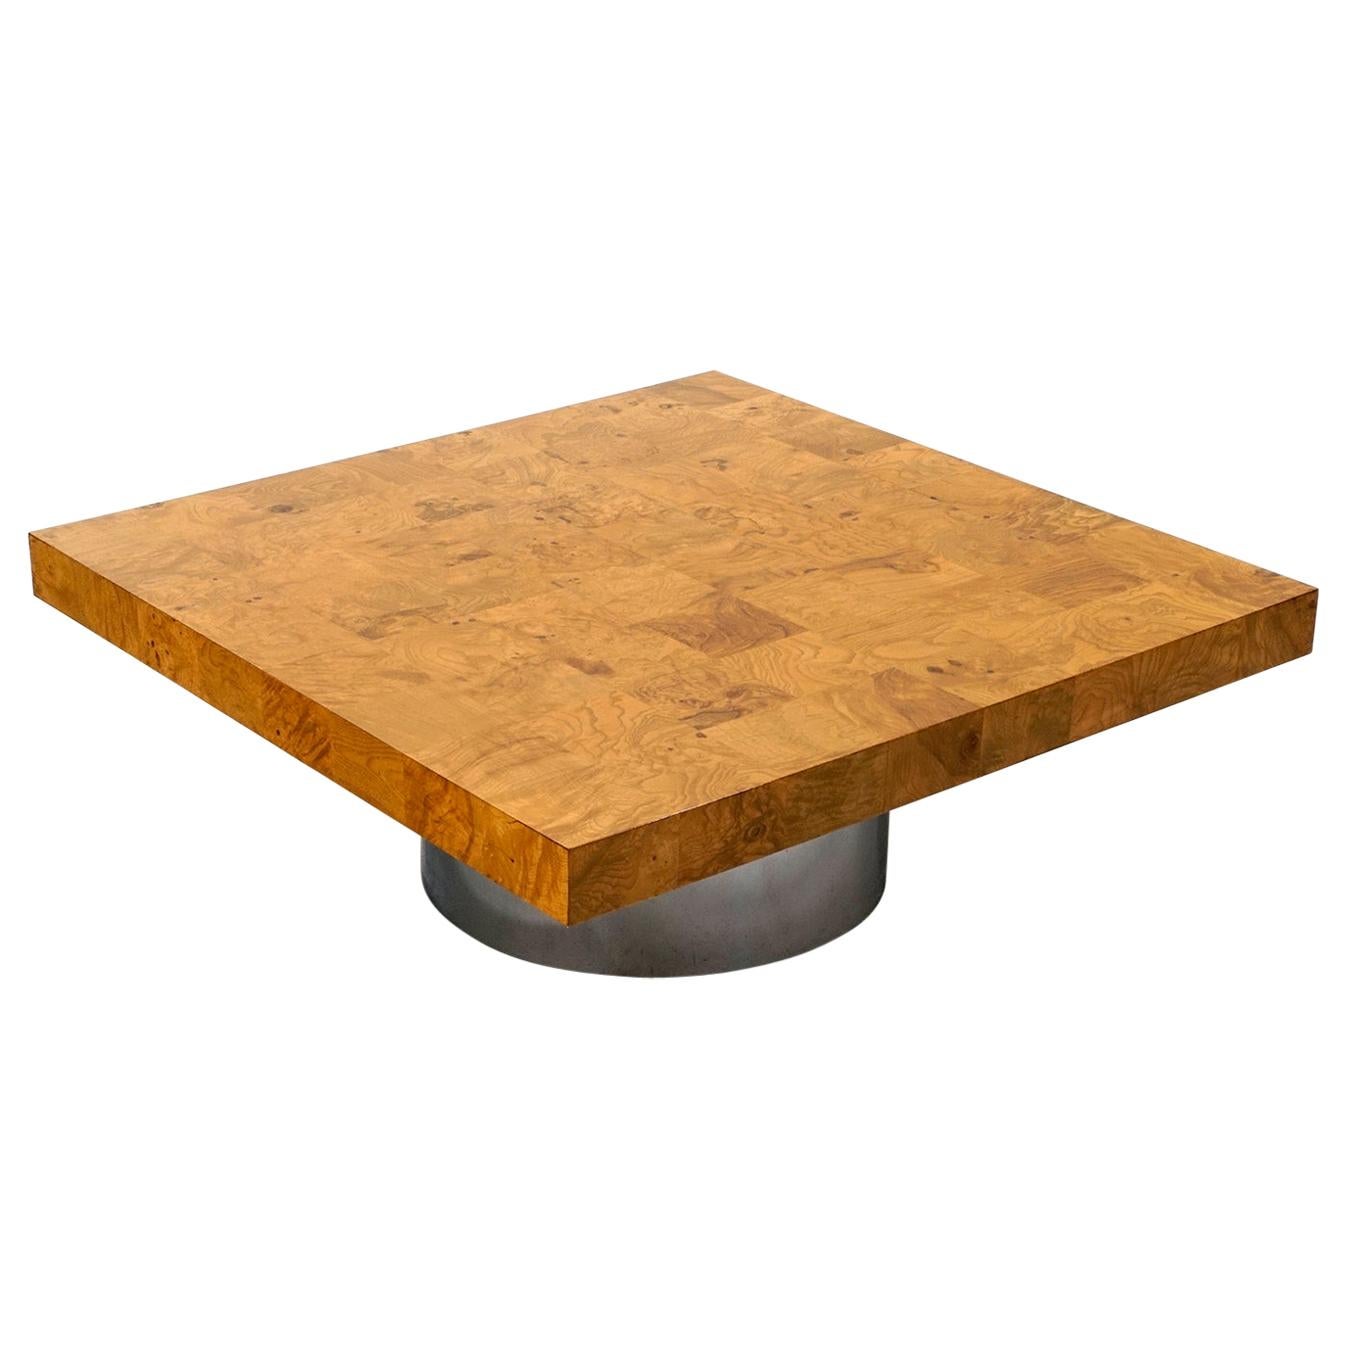 Burl Wood Square Coffee Table with Round Chrome Pedestal Base by Milo Baughman